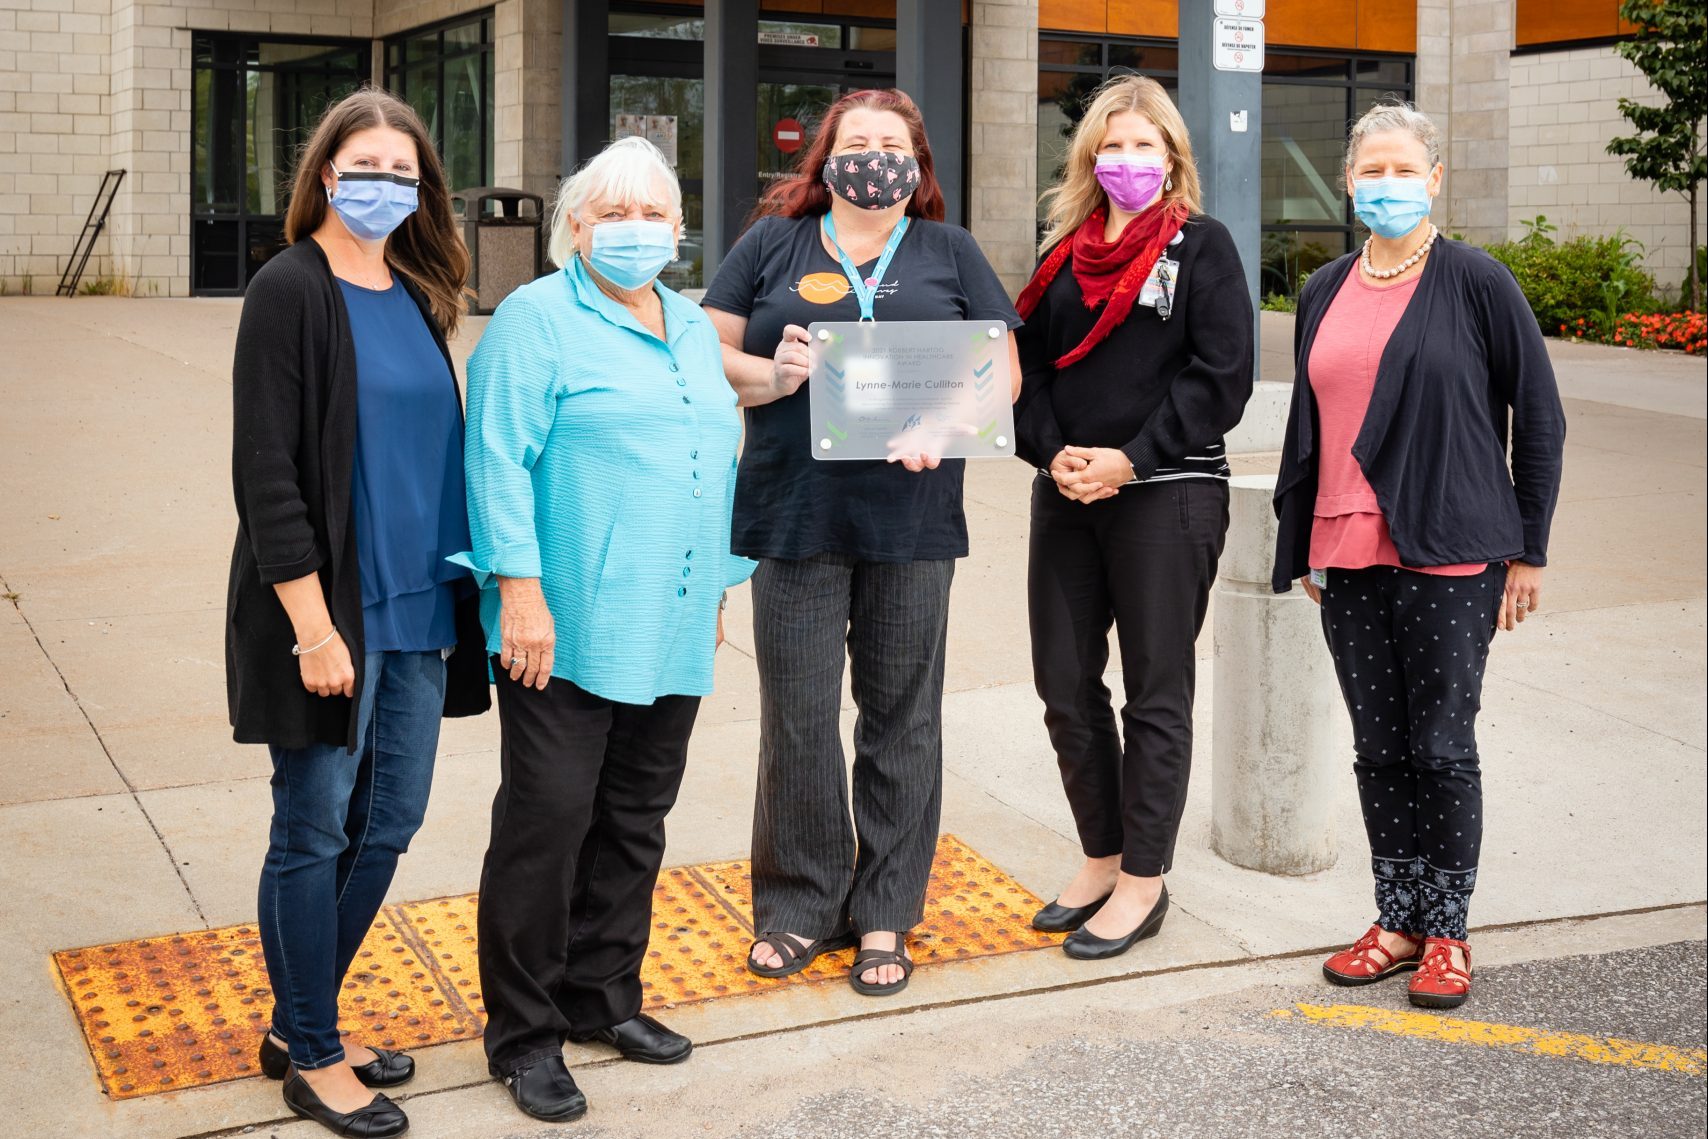 Five women in masks stand outside the hospital. One of them in holding an award plaque